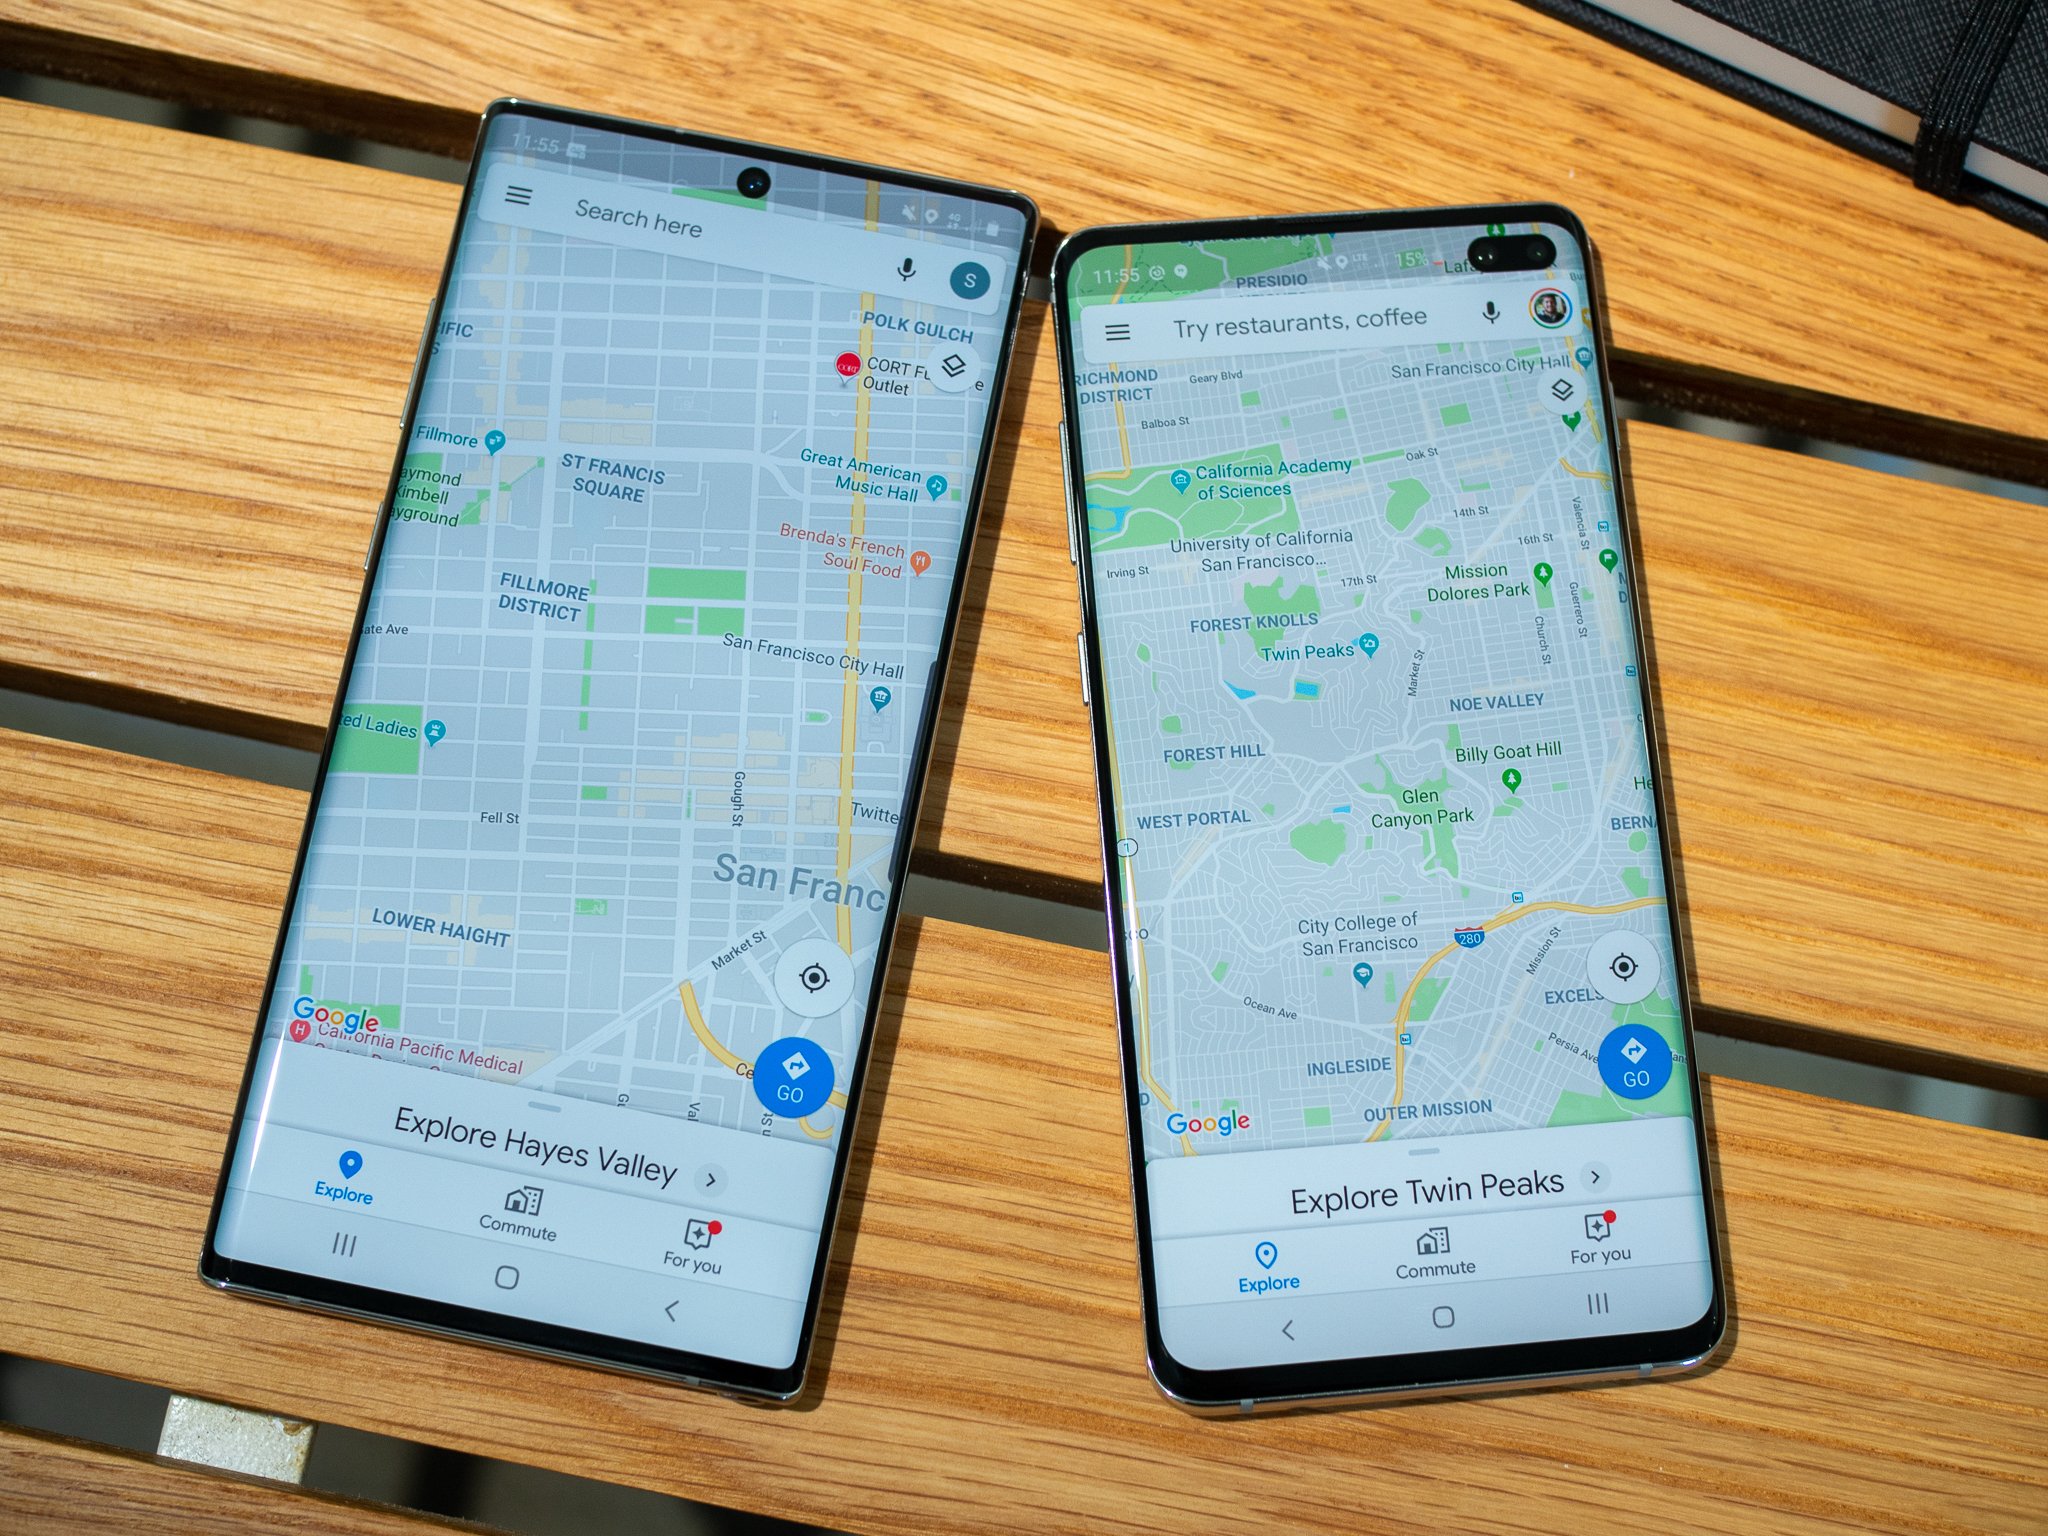 Note 10 vs note 11. Galaxy Note 10 vs Galaxy s10. Самсунг гелакси ноут 10 плюс. Samsung Galaxy s 10 Plus vs Note 10 Plus. Samsung Galaxy Note 10 Plus vs s10 5g.